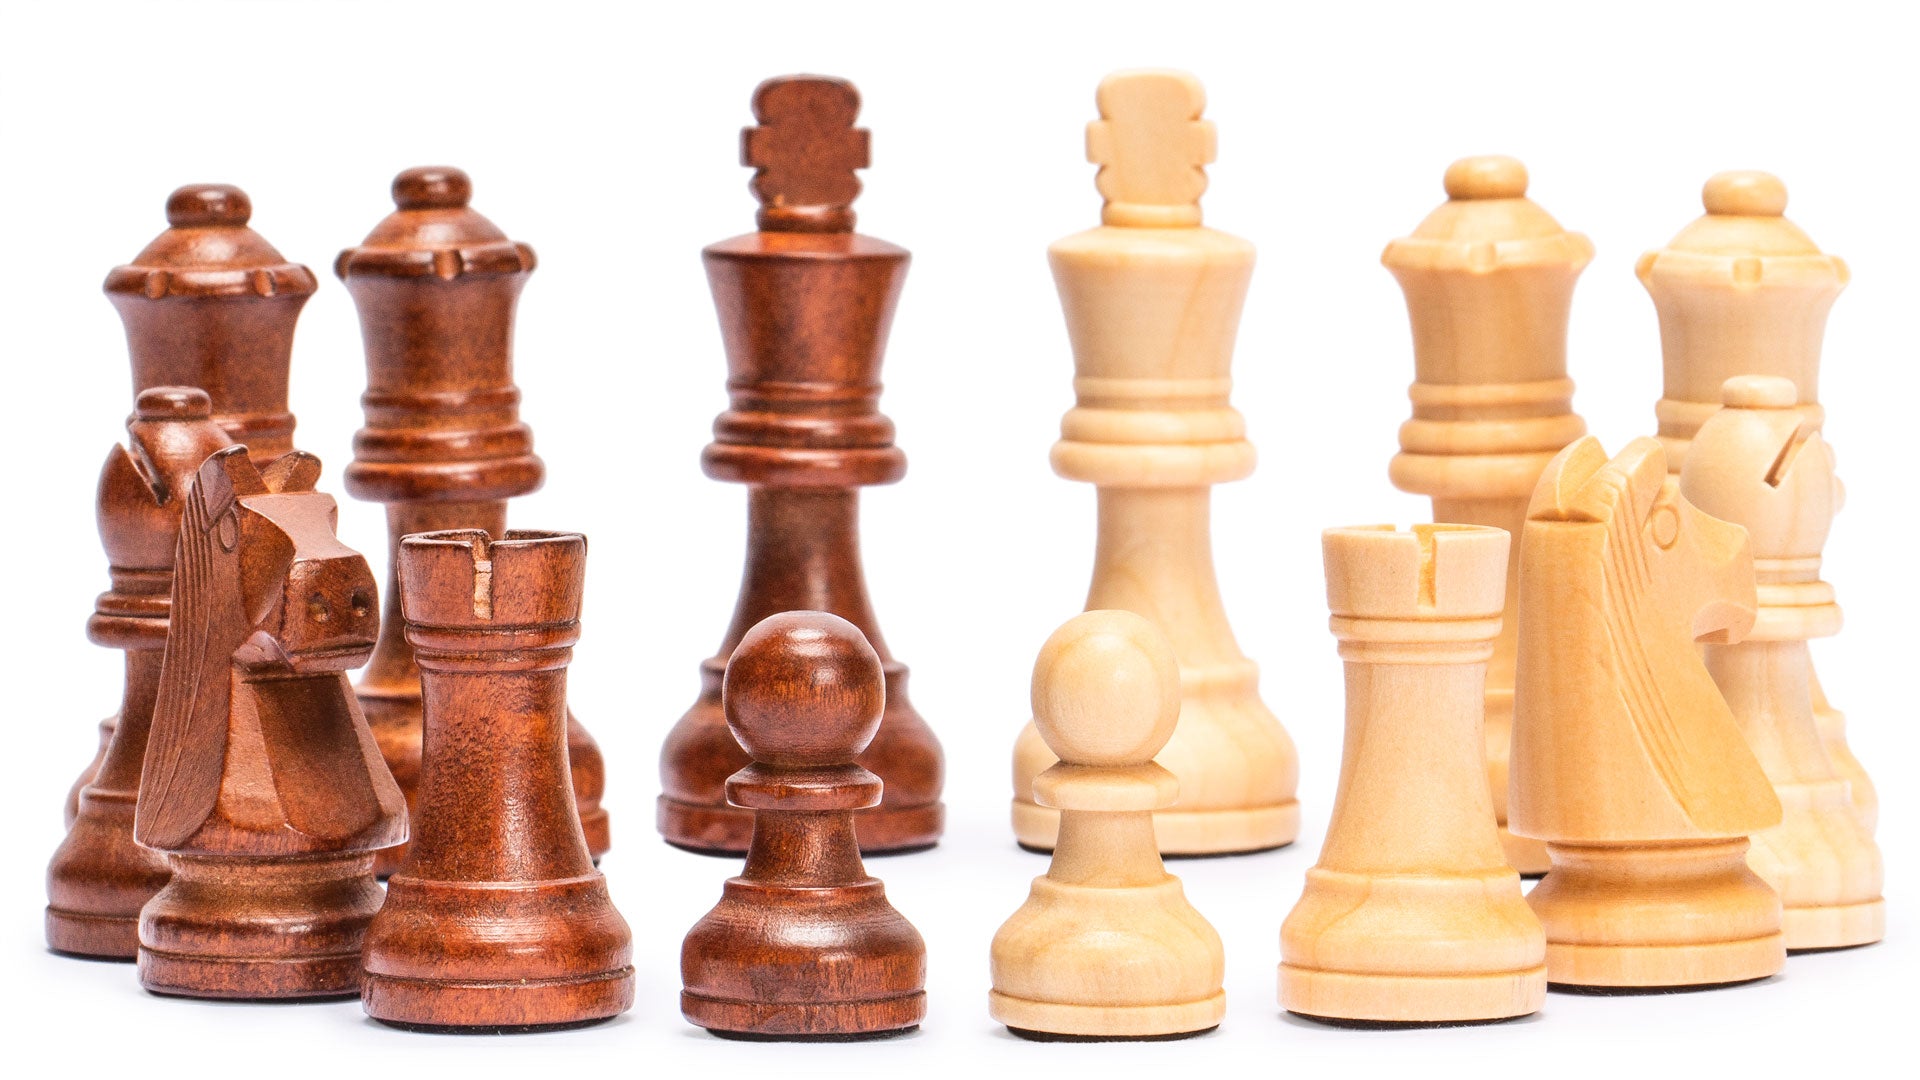 Husaria Staunton Tournament No. 4 Chessmen with 2 Extra Queens and Wooden Box, 3" Kings-Husaria